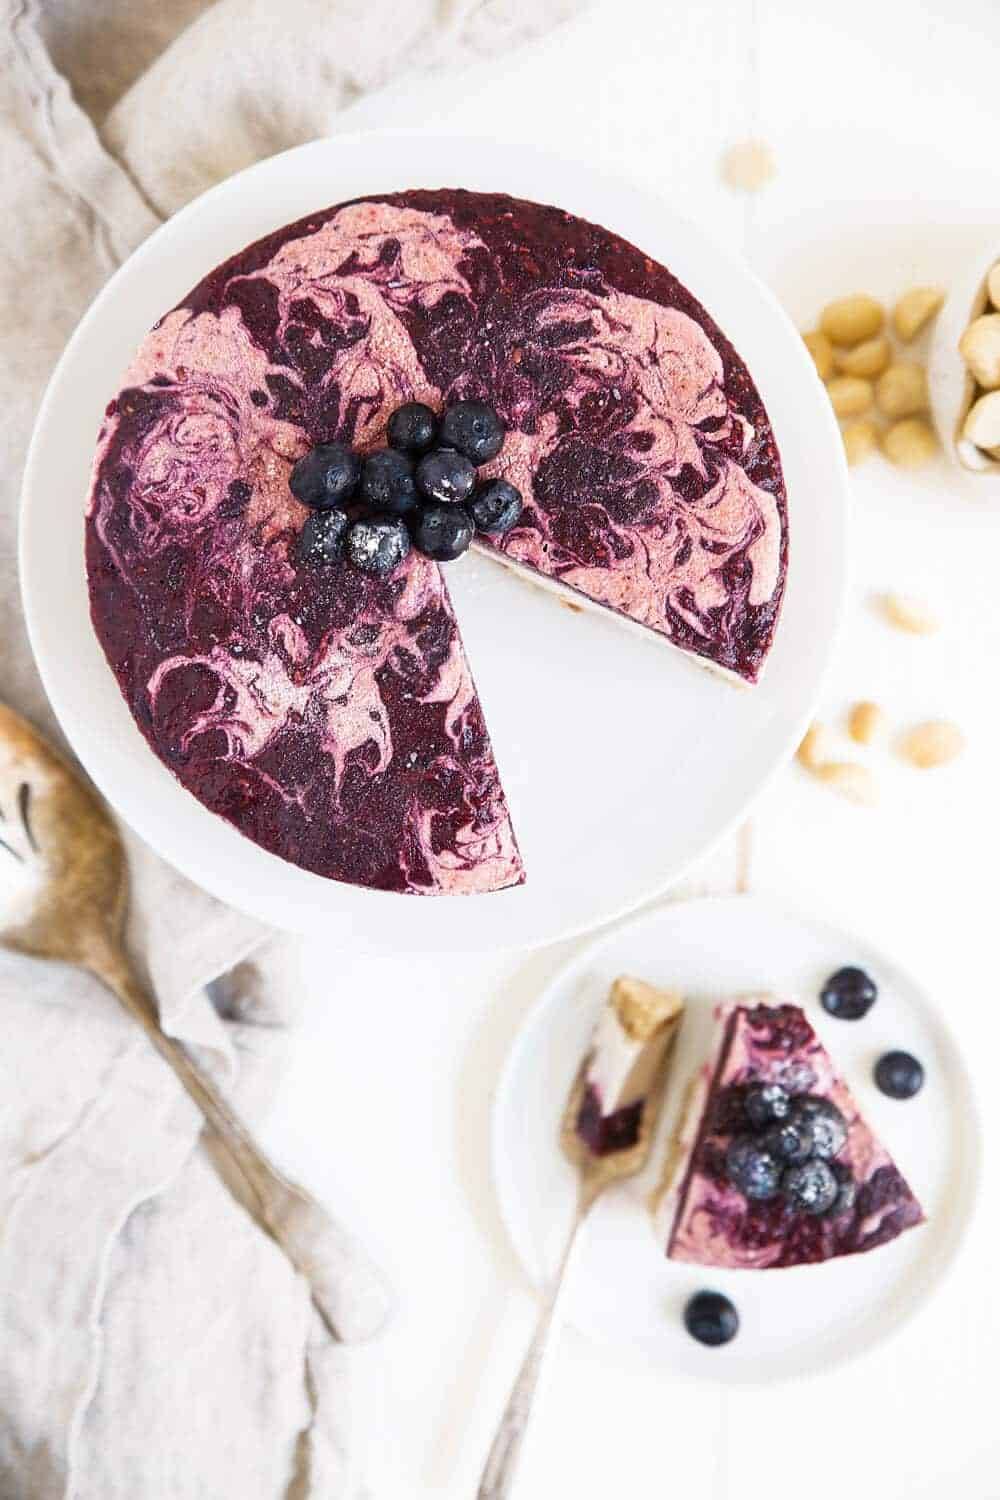 Blueberry Cheesecake on a cake stand with a slice missing